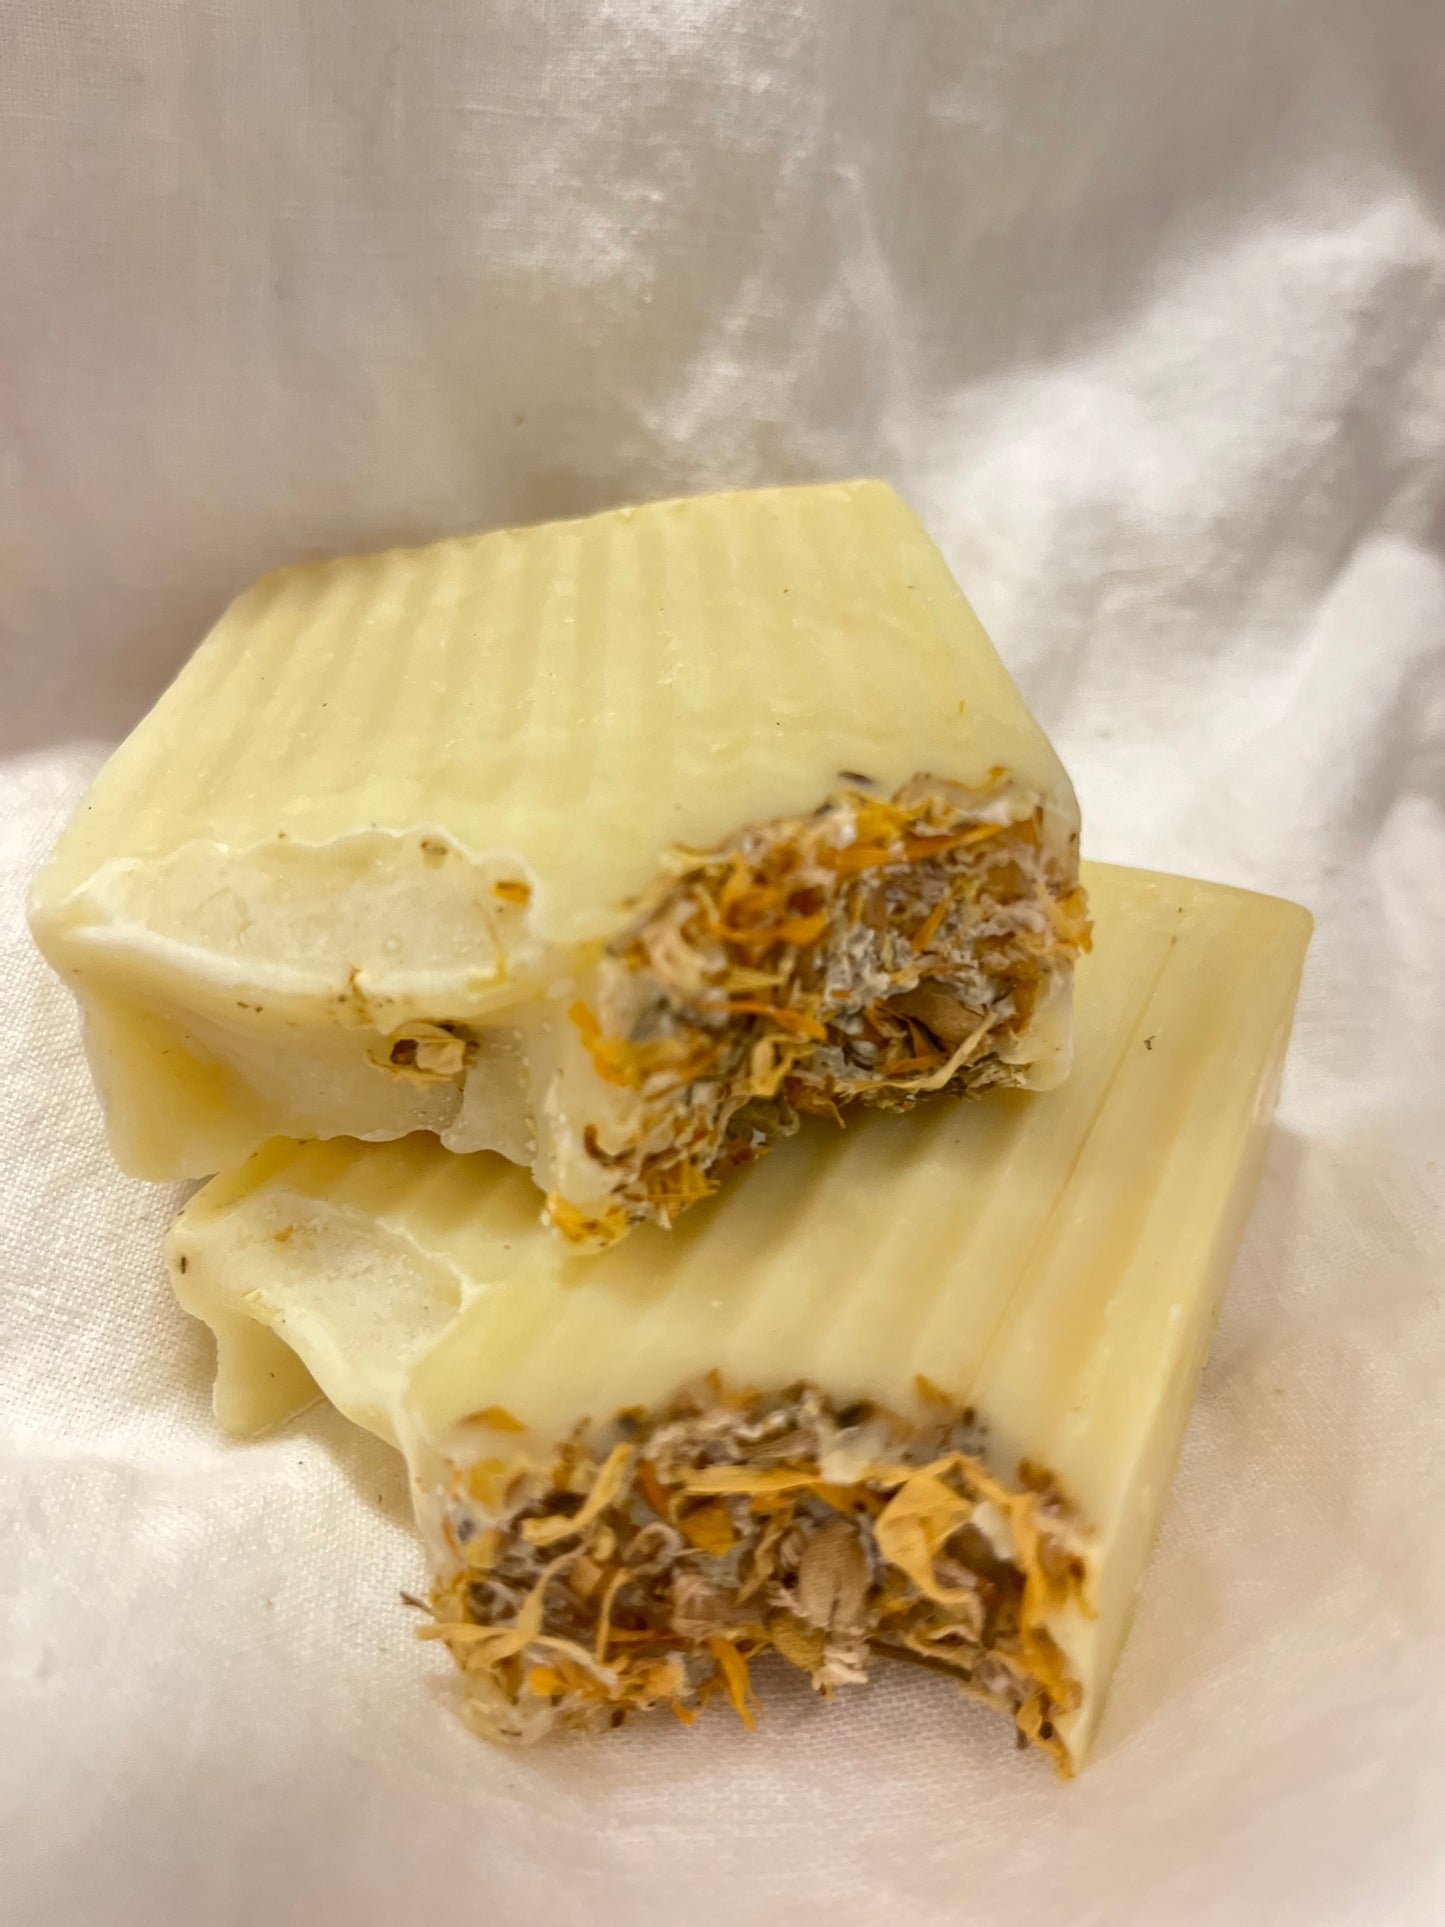 New: Calendula and Chamomile Soap (Unscented) - For sensitive, baby, and acne-prone skin